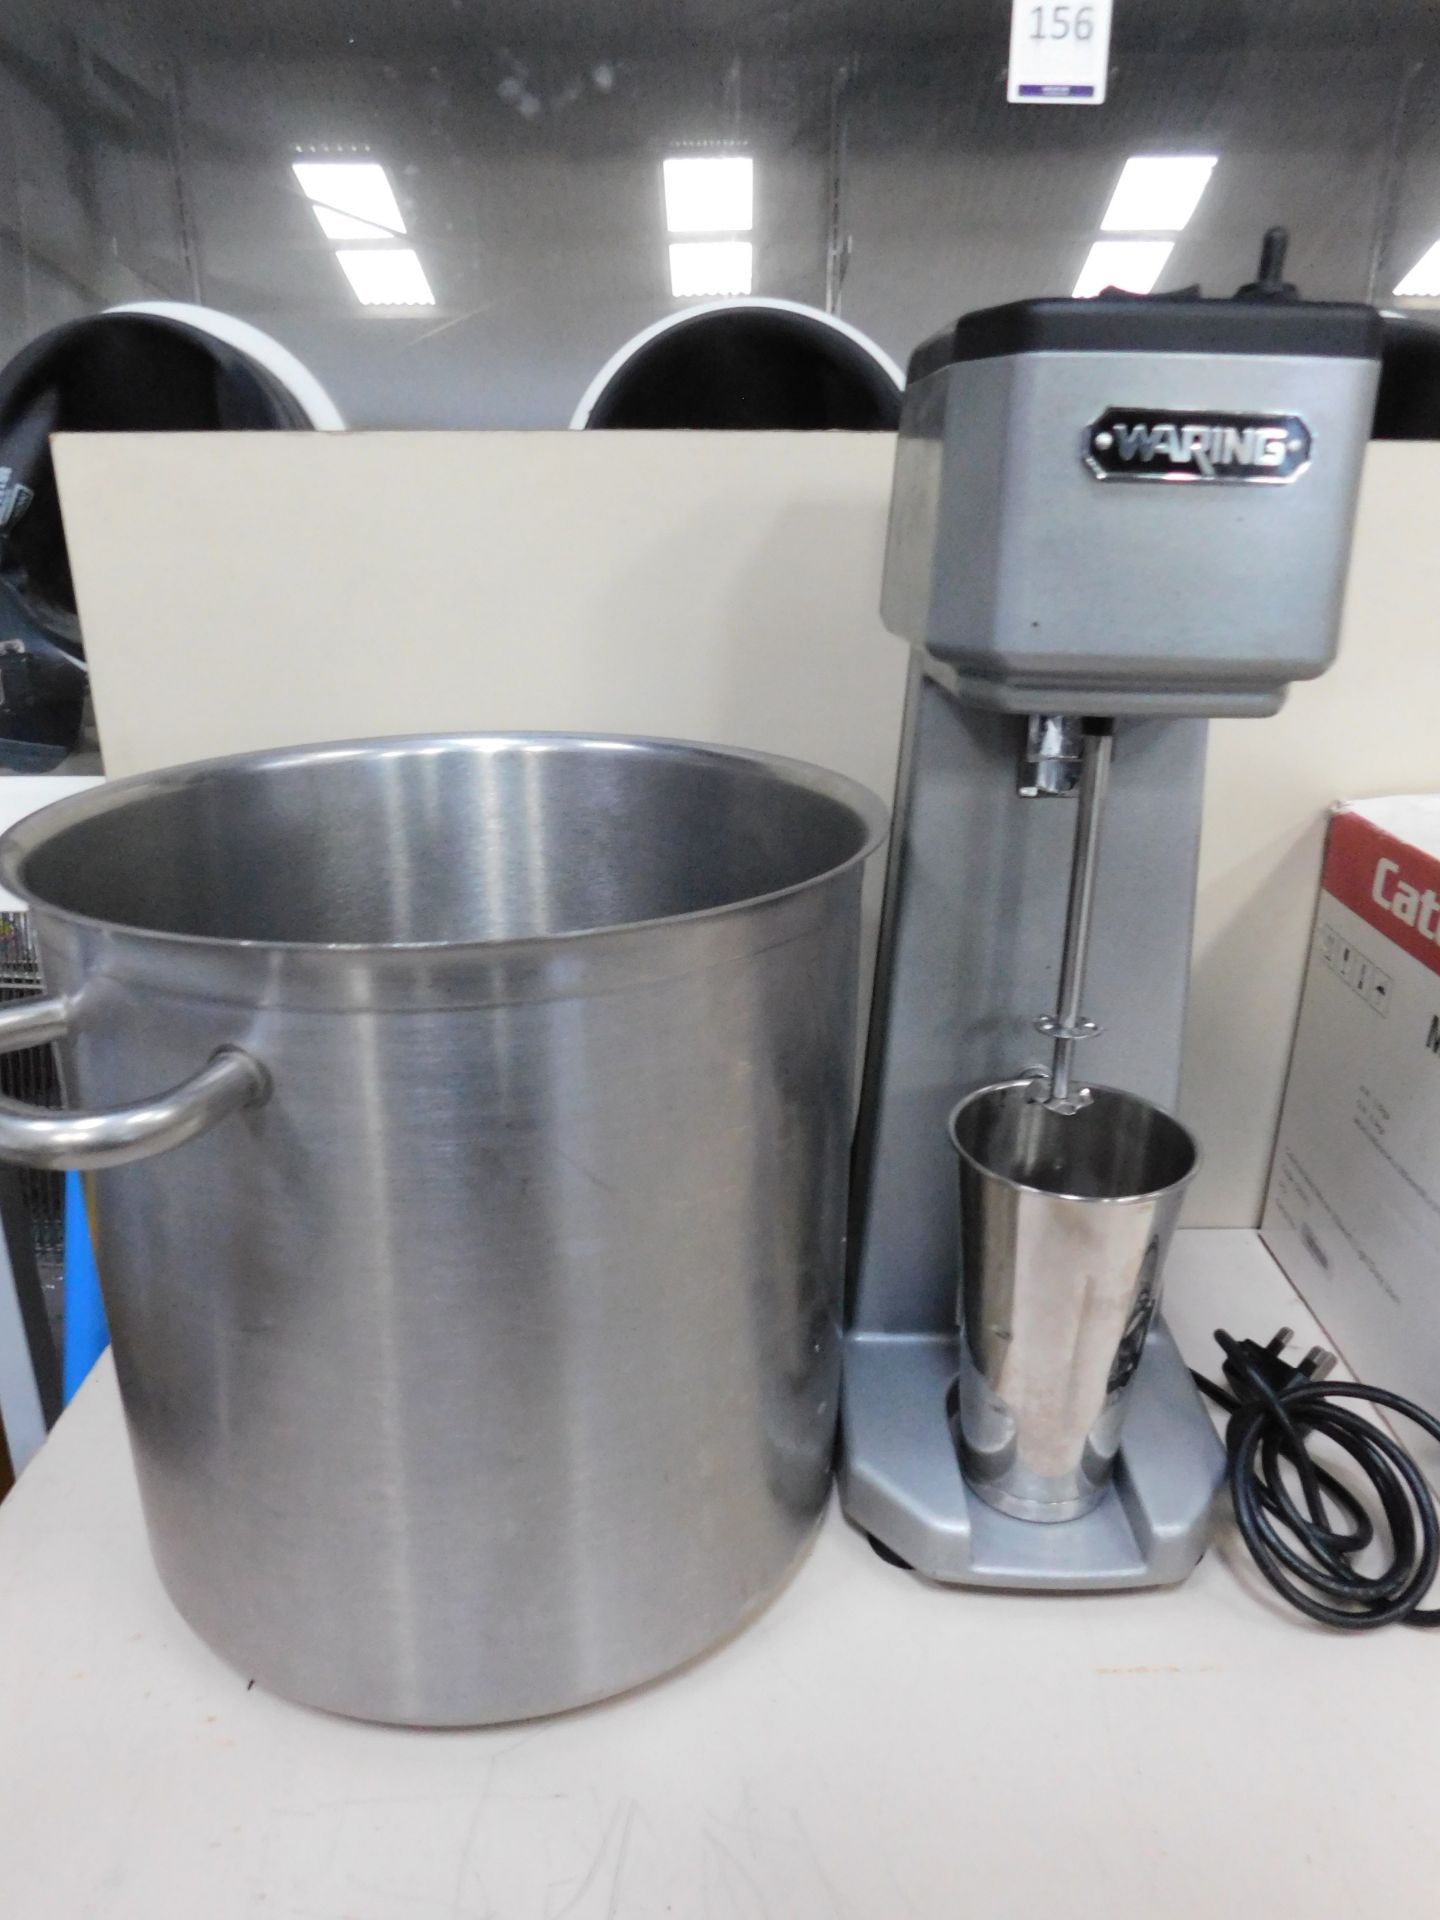 Waring Milkshake Mixer & Large Stainless Steel Cooking Pot (Location: Brentwood. Please Refer to